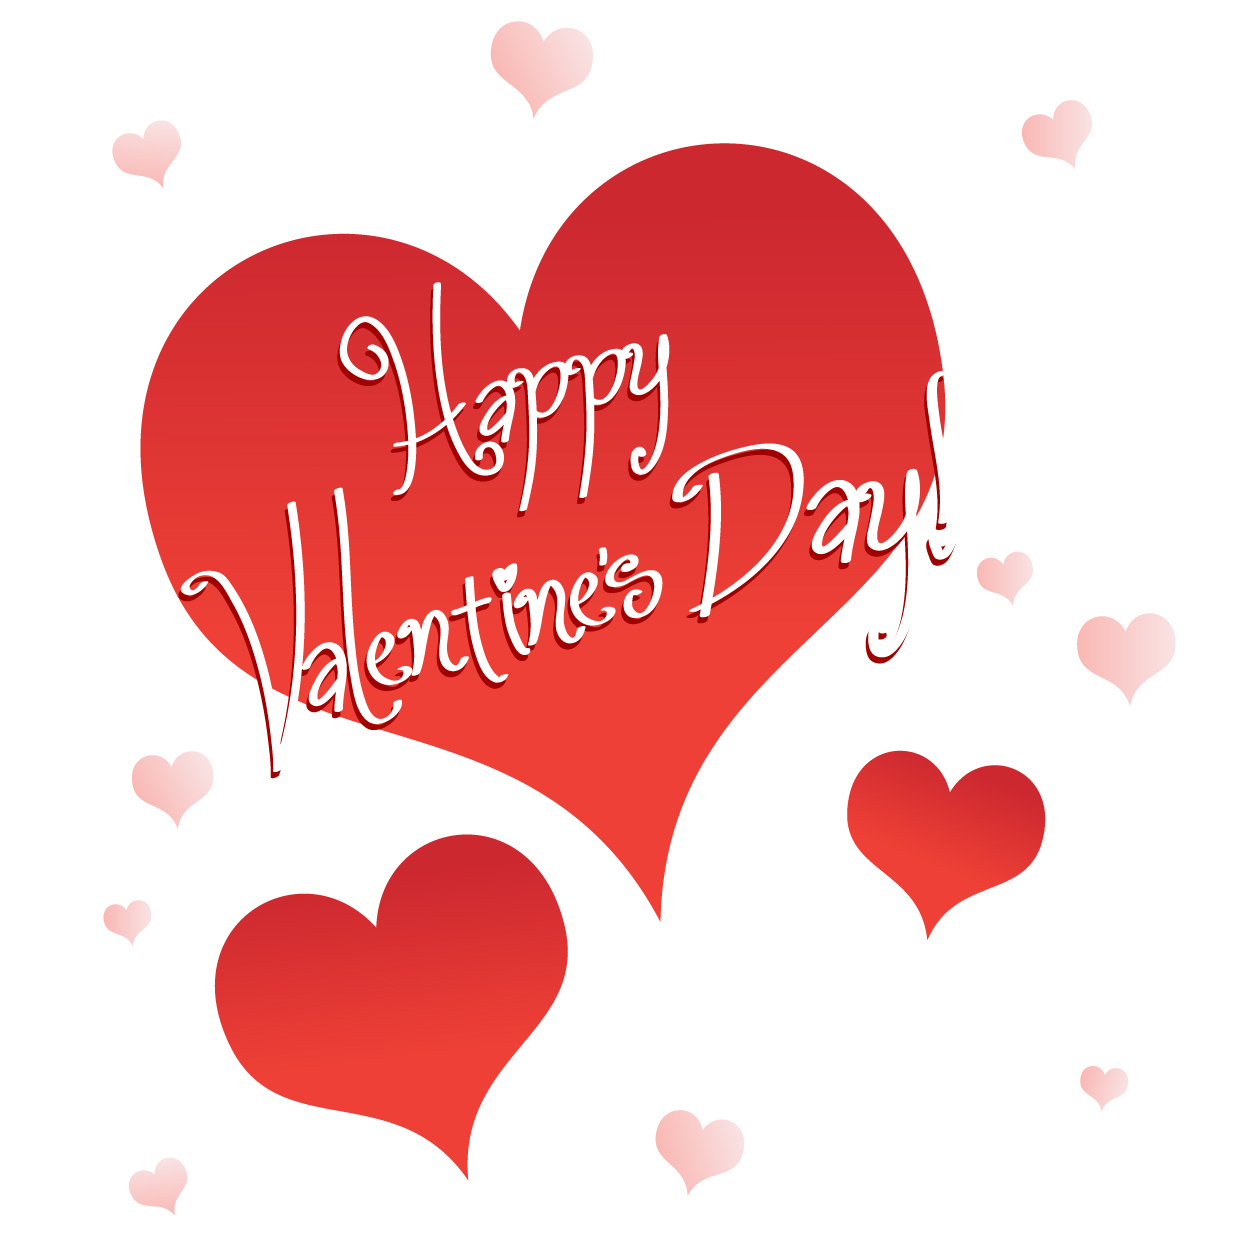 Valentines day clipart for sh